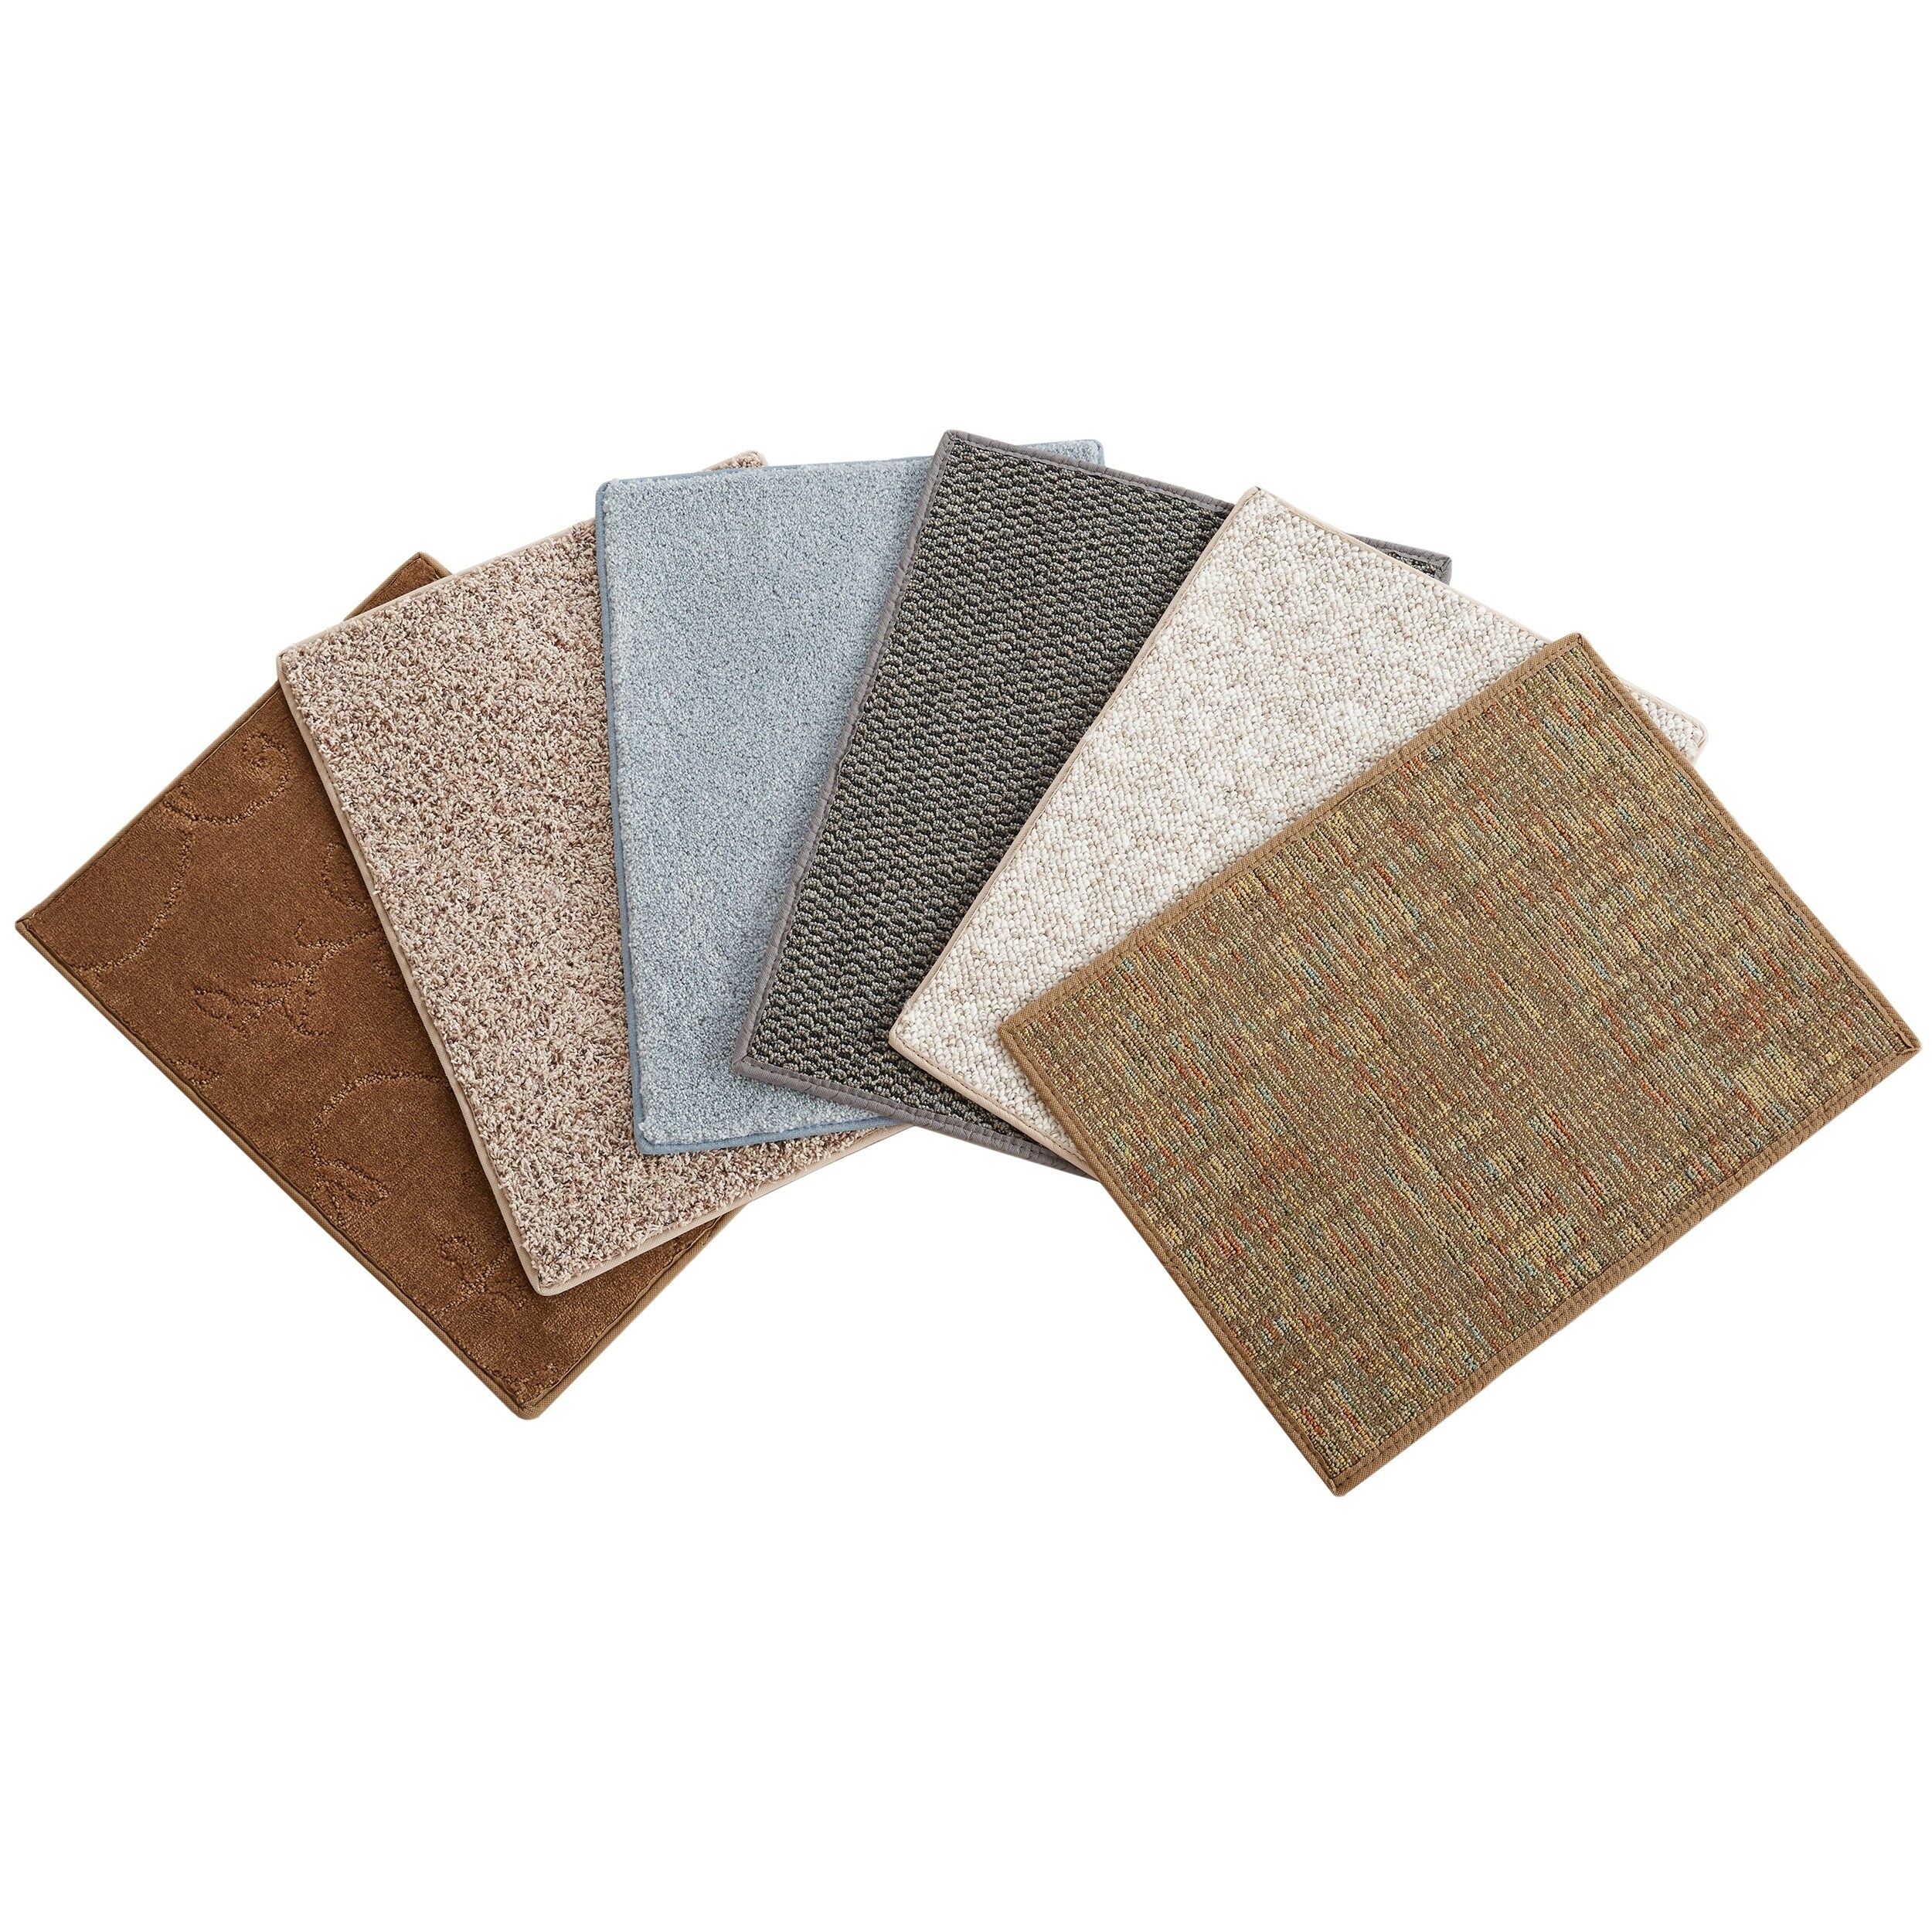 where to buy bound carpet remnants